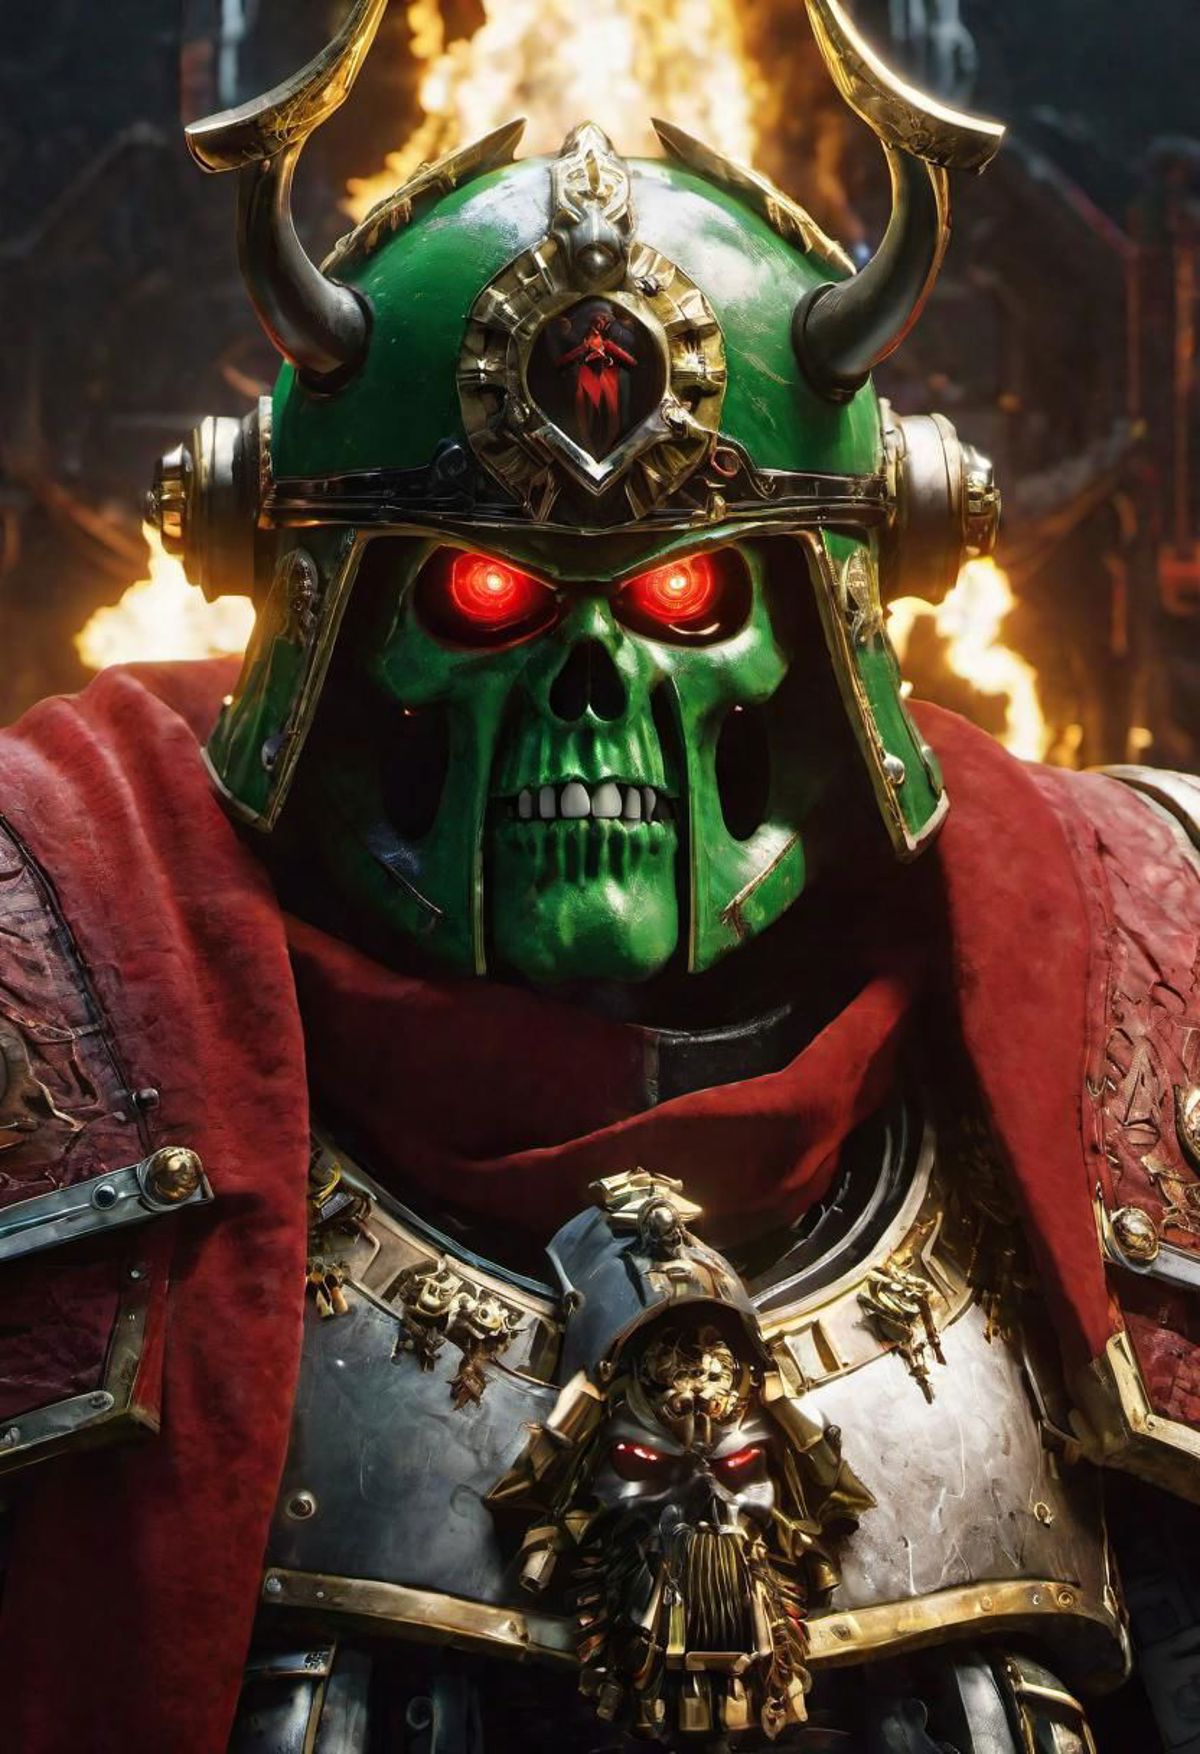 A green-faced character wearing a green helmet with horns and a red cape.